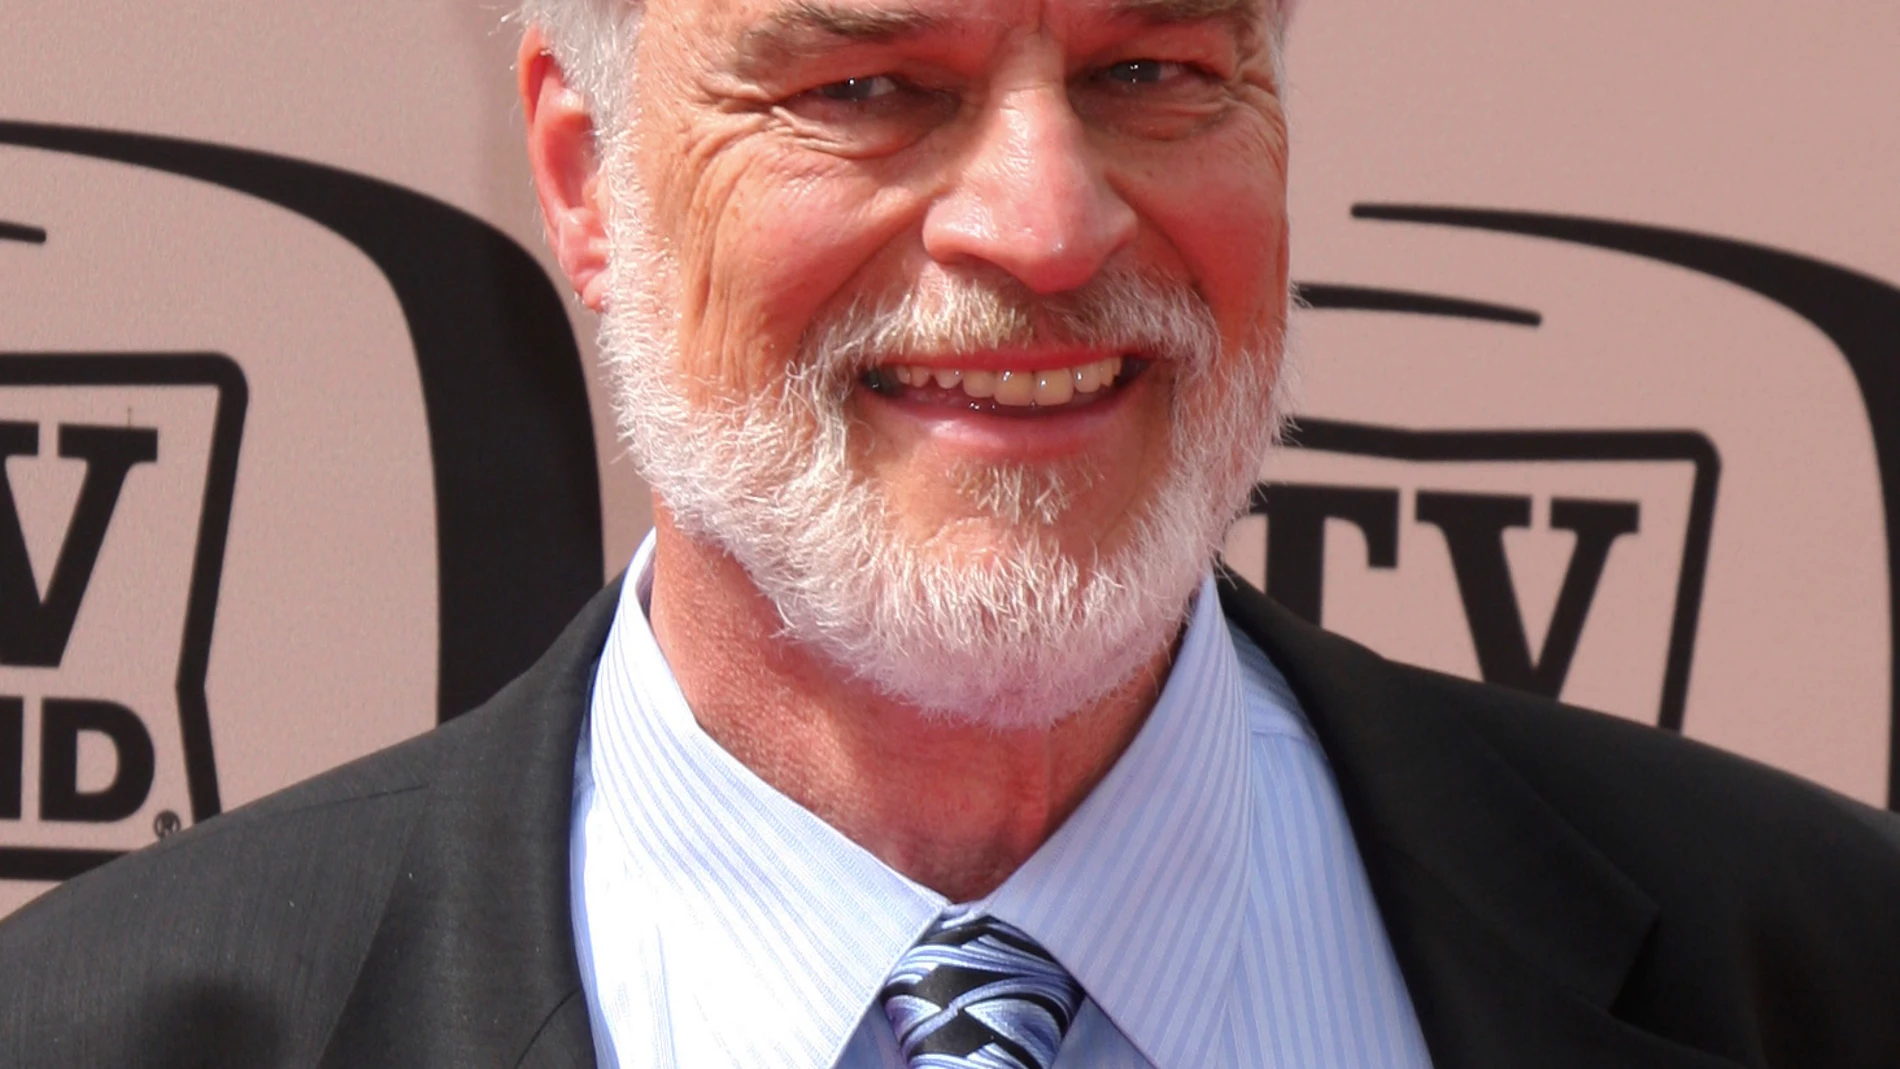 In this photo provided by Kathy Hutchins, Richard Moll arrives at the 2010 TV Land Awards Sony Studios Culver City, Calif., April 17, 2010. Moll, a character actor who found lasting fame as an eccentric but gentle giant bailiff on the original “Night Court” sitcom, has died at age 80. Moll died Thursday, Oct. 26, 2023, at his home in Big Bear Lake, Calif., according to a Jeff Sanderson, a family spokesperson. (Kathy Hutchins/Hutchins Photo via AP)